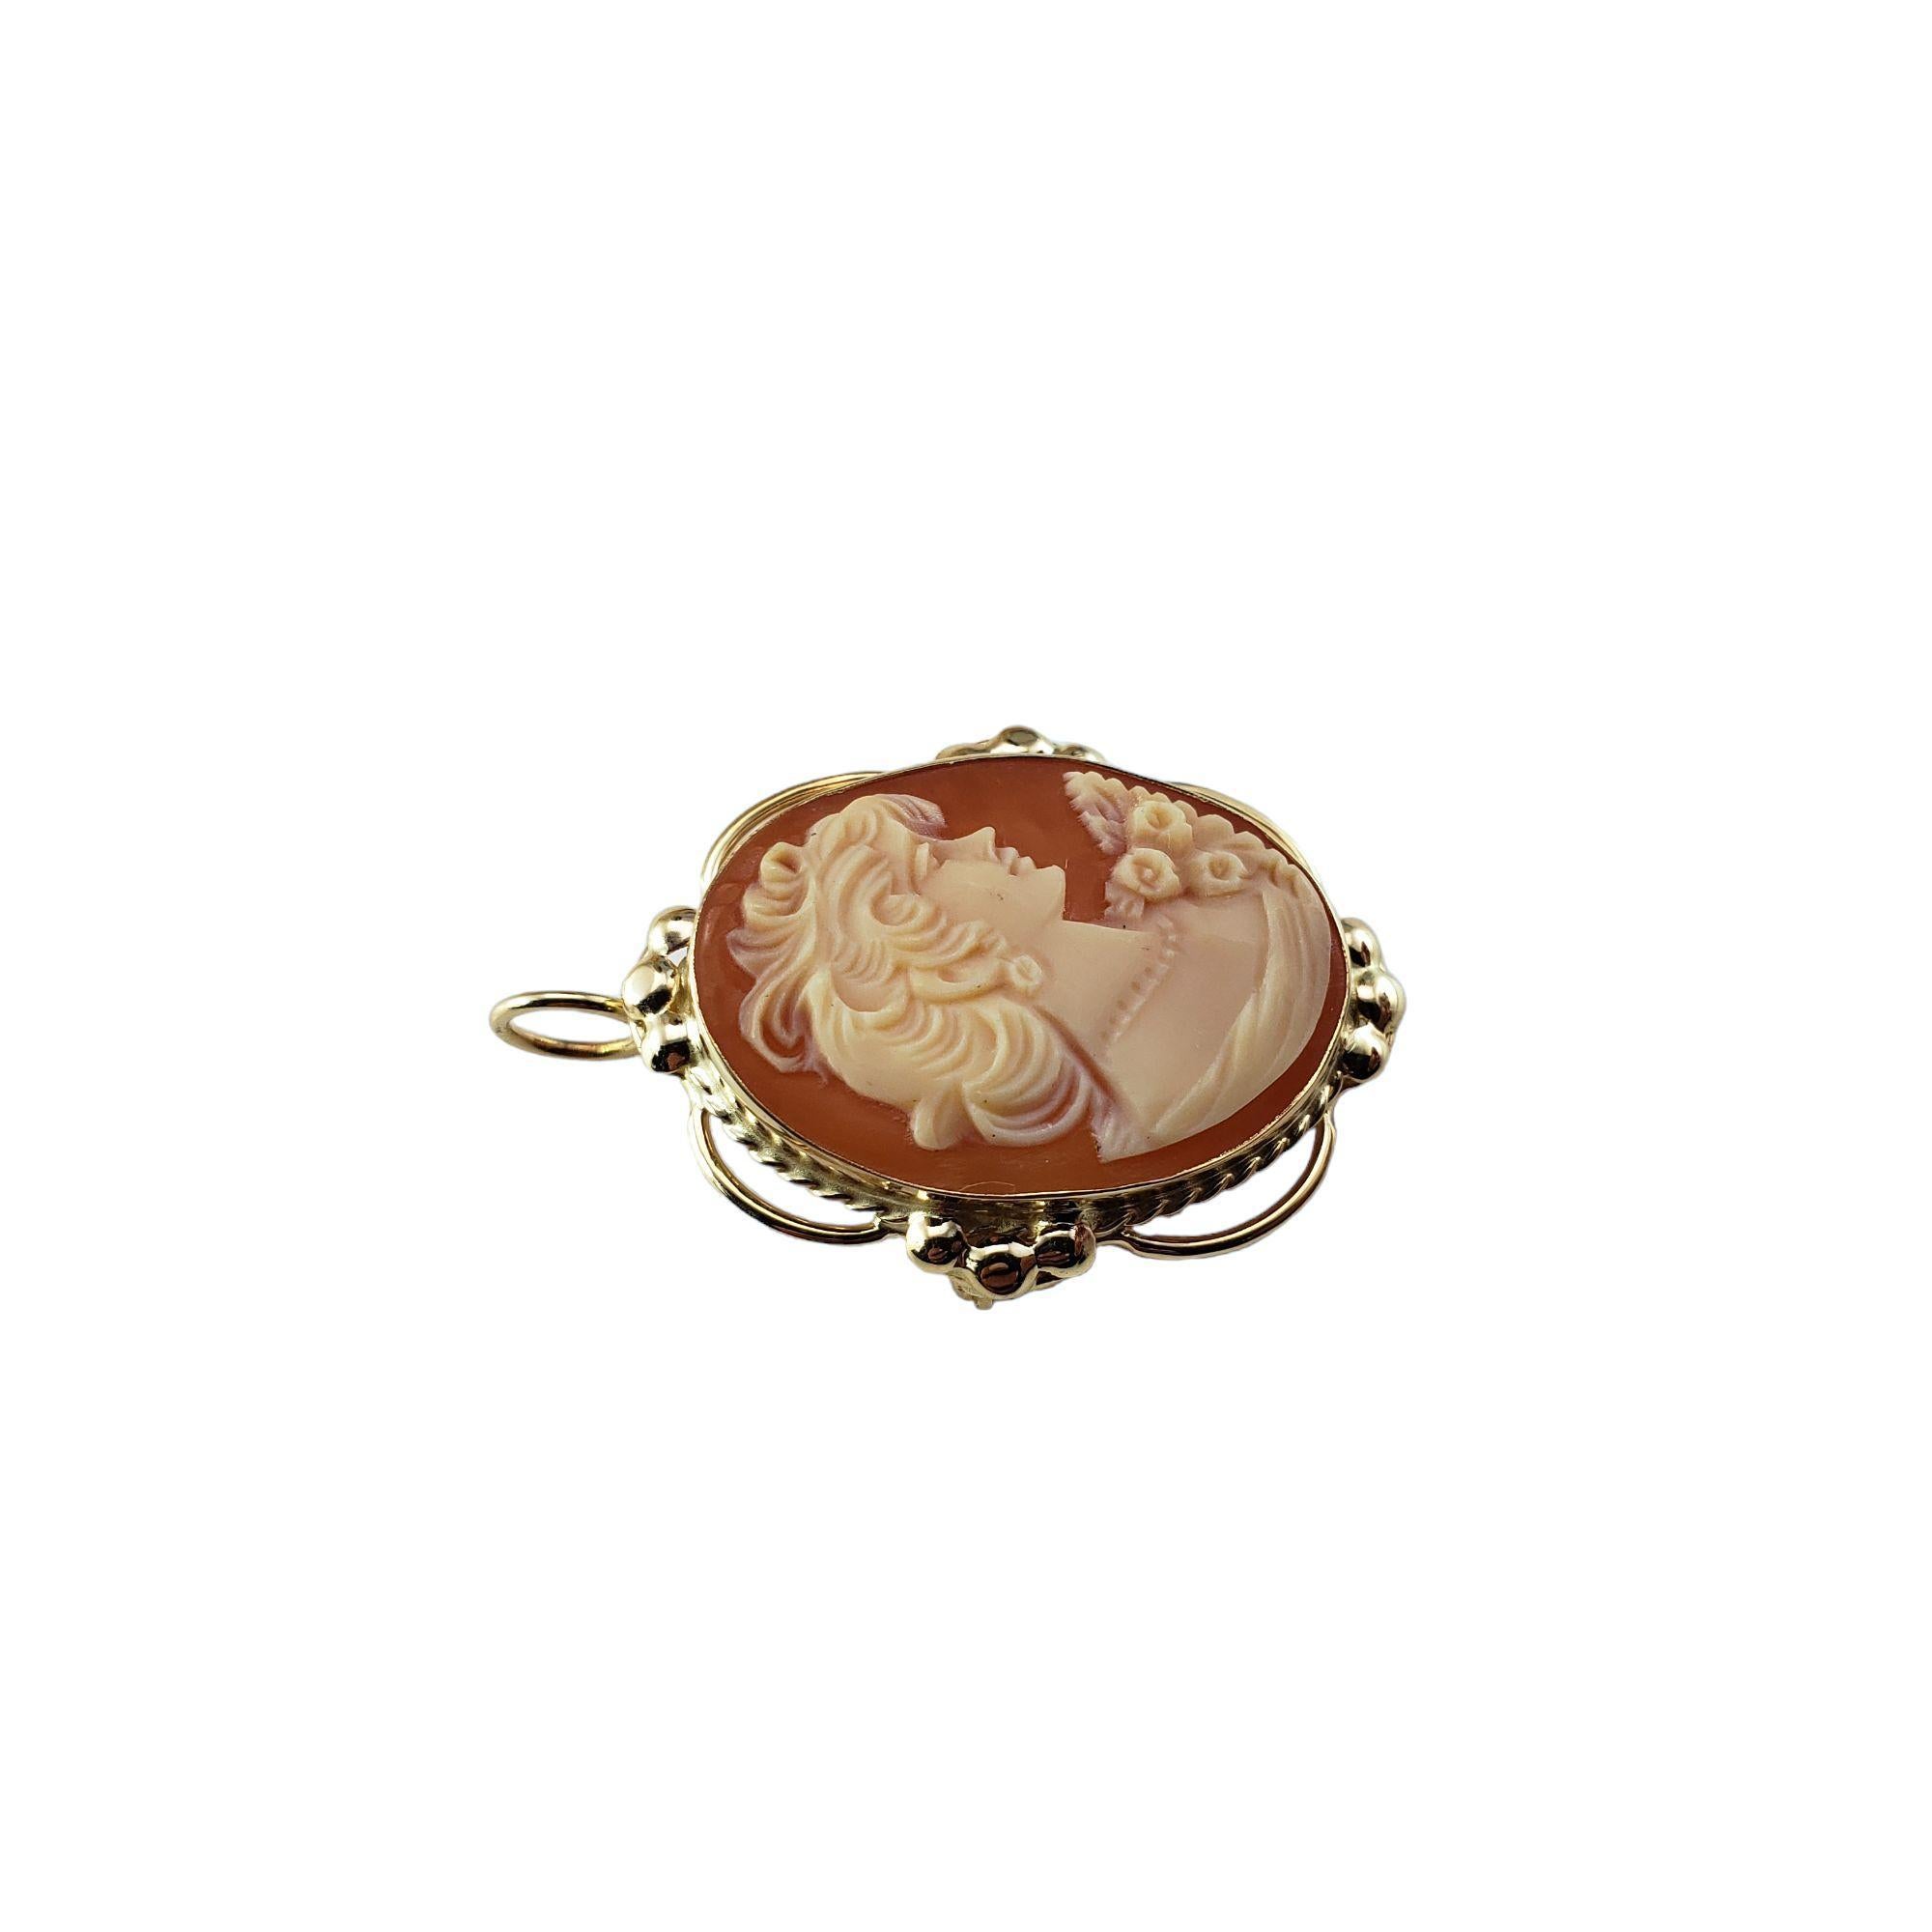  10 Karat Yellow Gold Cameo Brooch/Pendant #15233 In Good Condition For Sale In Washington Depot, CT